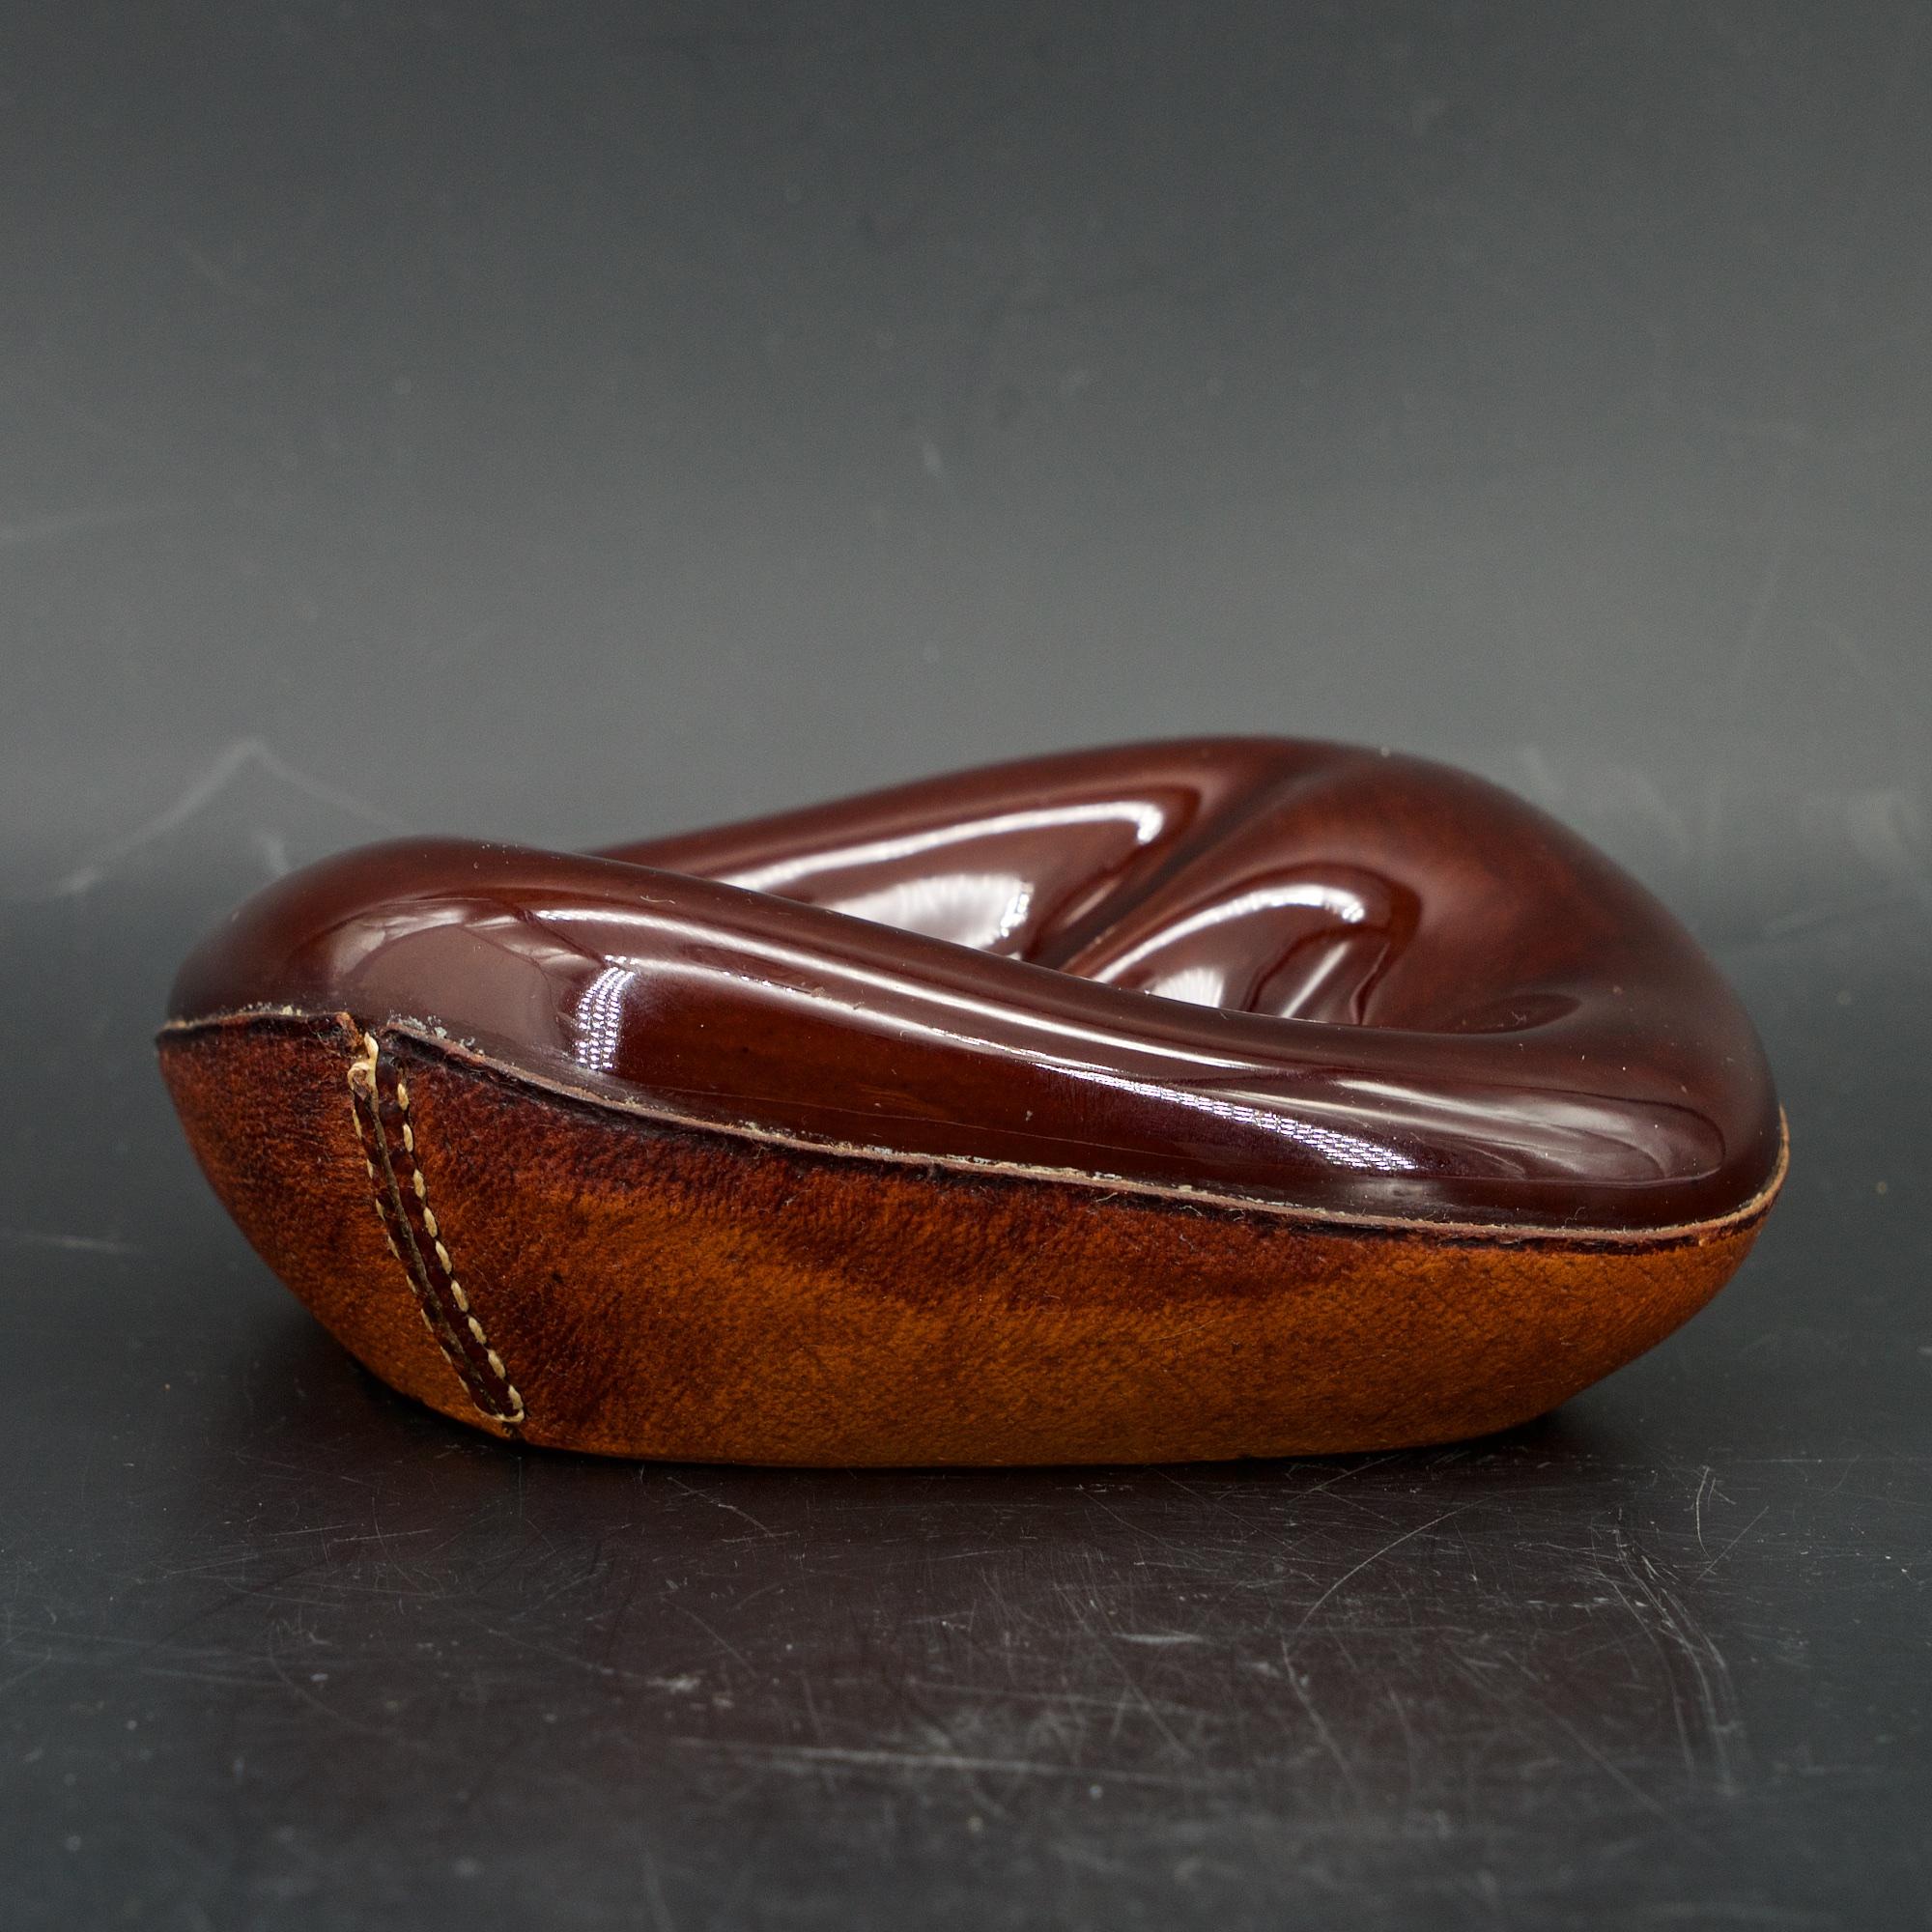 Brown high gloss freeform slipcast dish in leather wrapped bottom. Mfg. Longchamp, France. Design attributed to Georges Jouve.